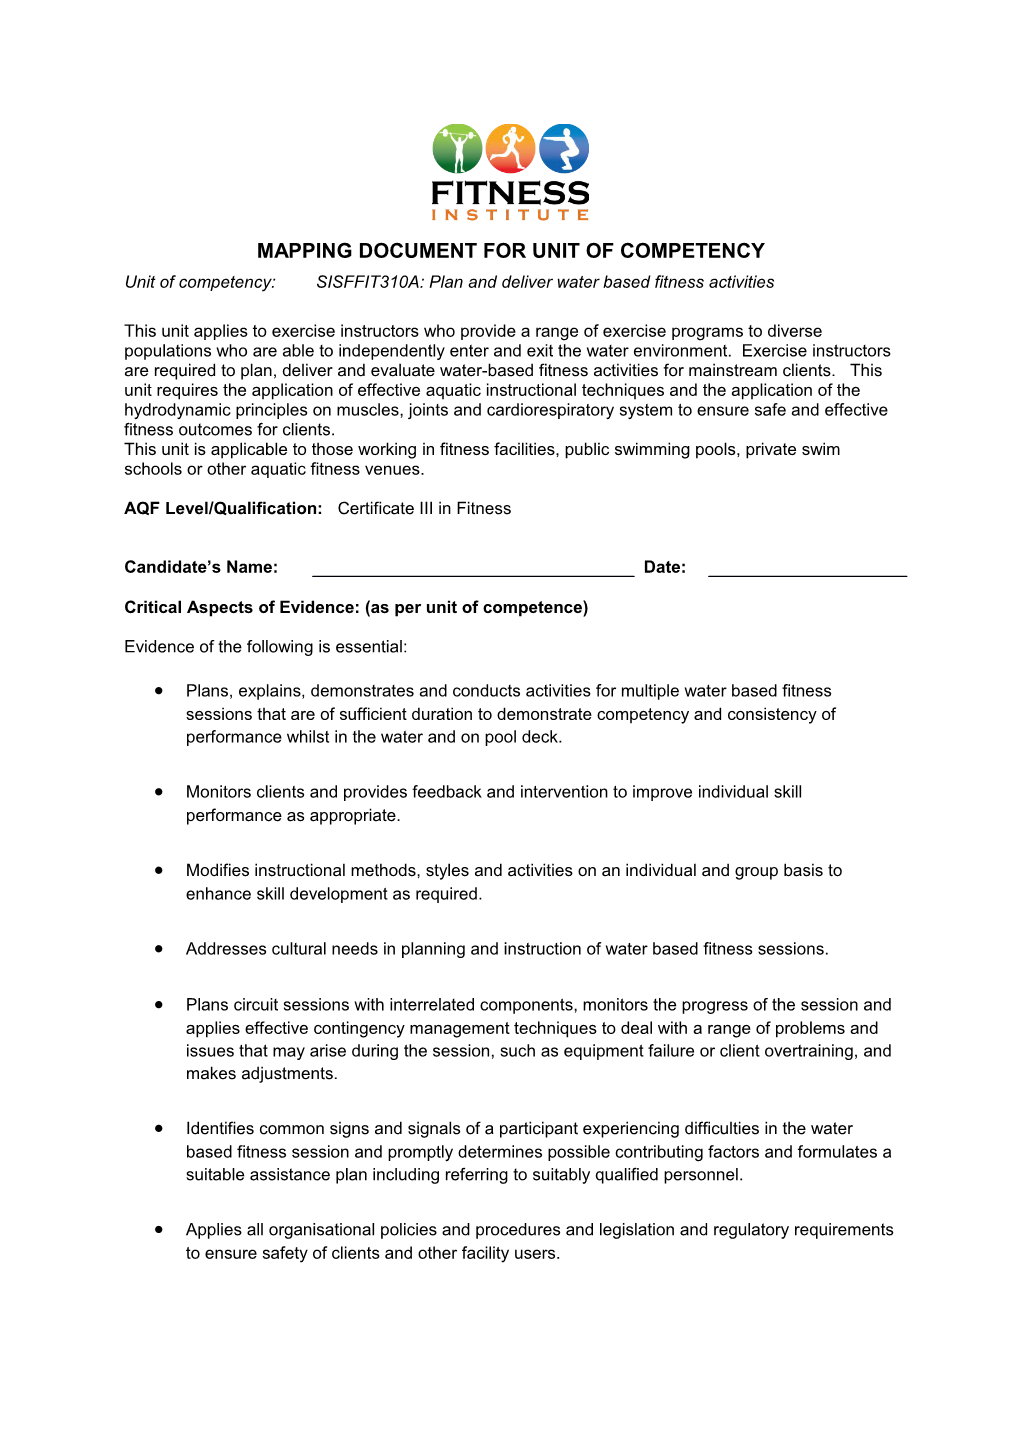 Mapping Document for Unit of Competency